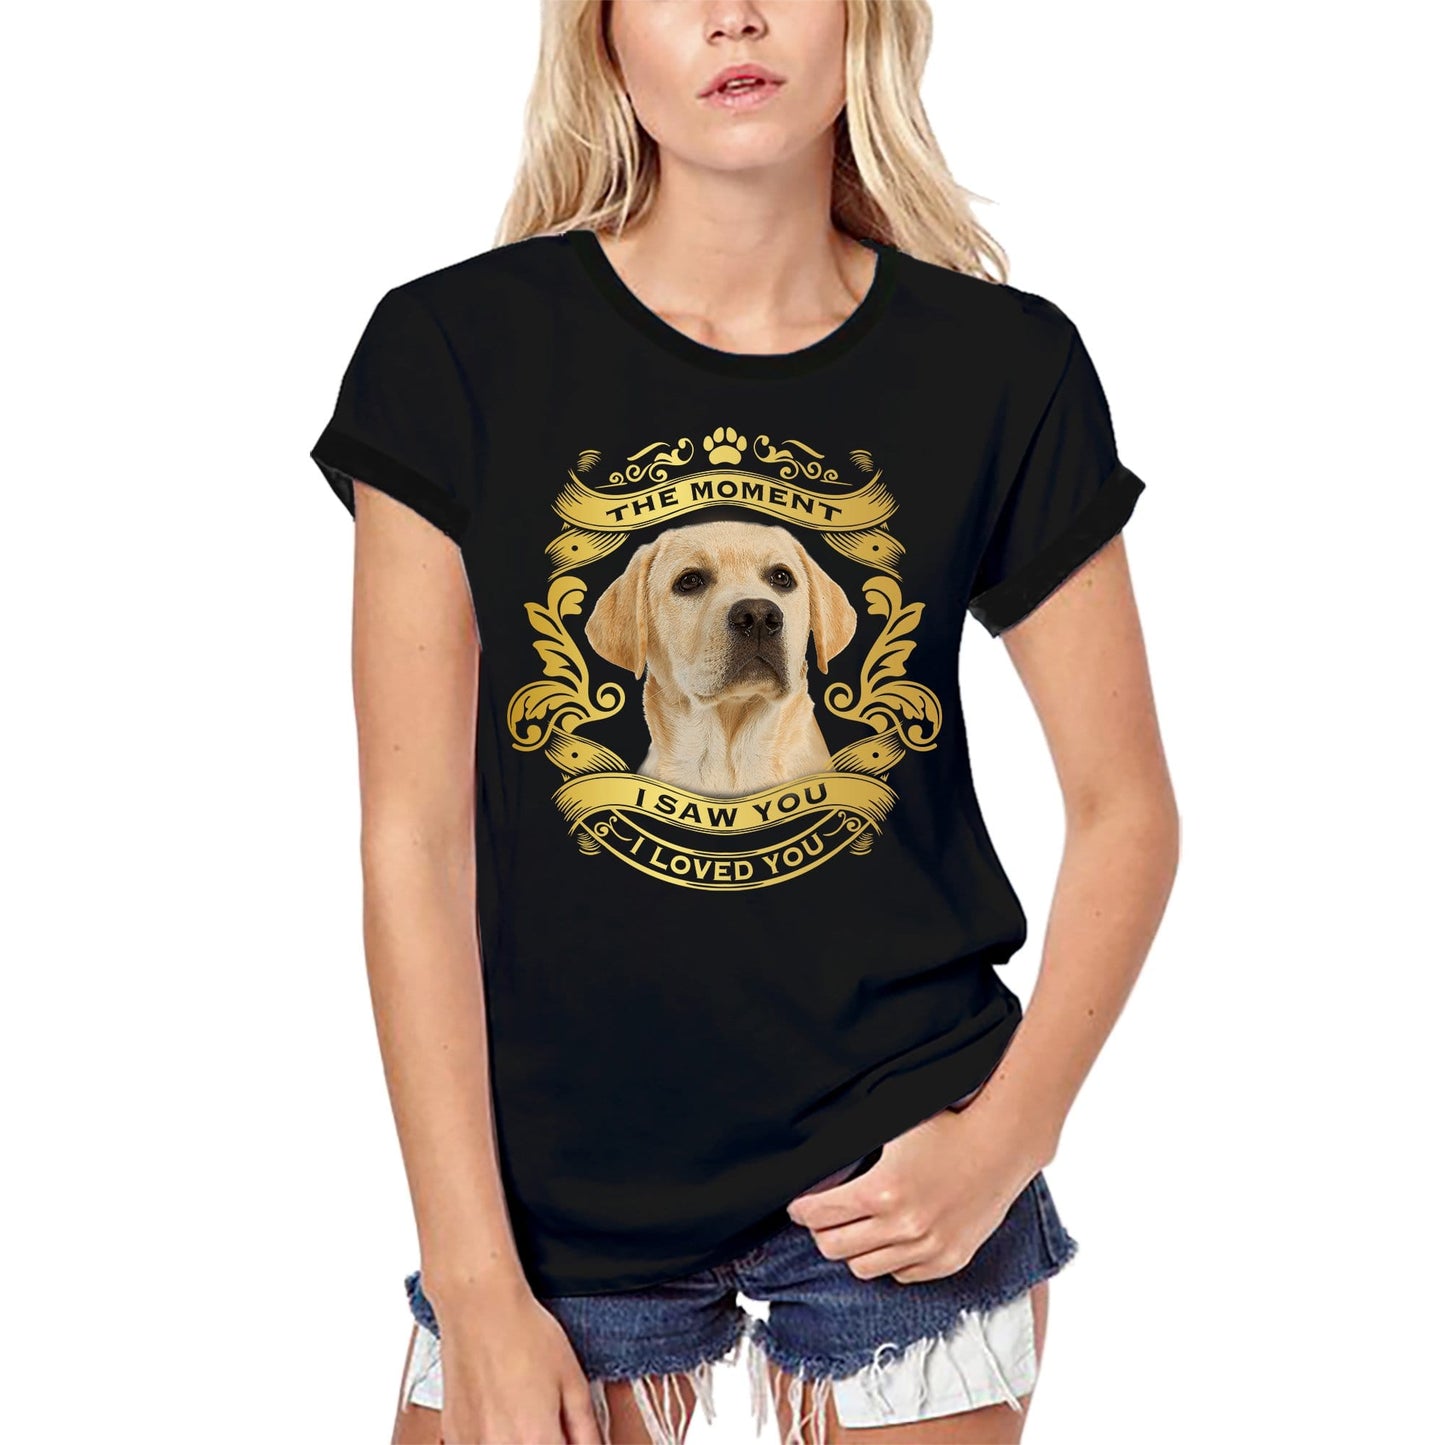 ULTRABASIC Women's Organic T-Shirt Labrador Dog - Moment I Saw You I Loved You Puppy Tee Shirt for Ladies